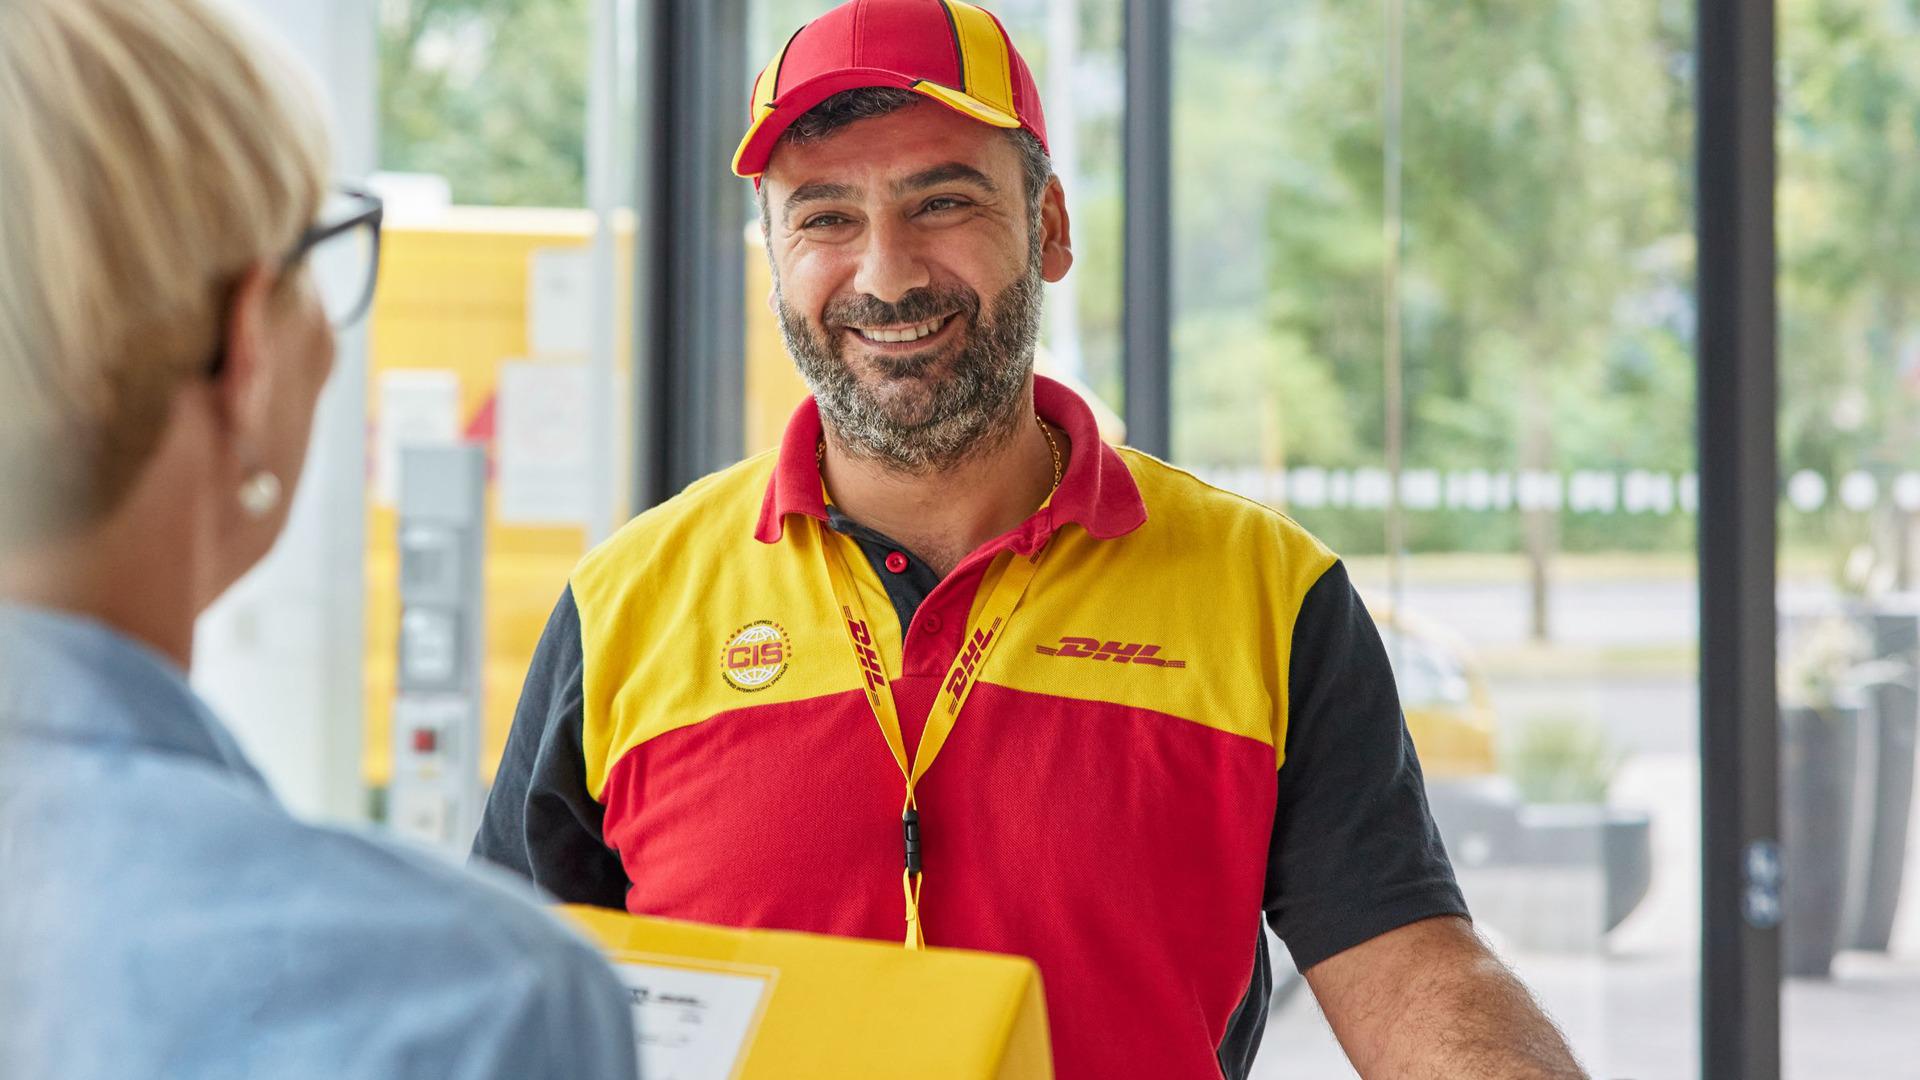 DHL Express Service Point (WHSmith Troon)